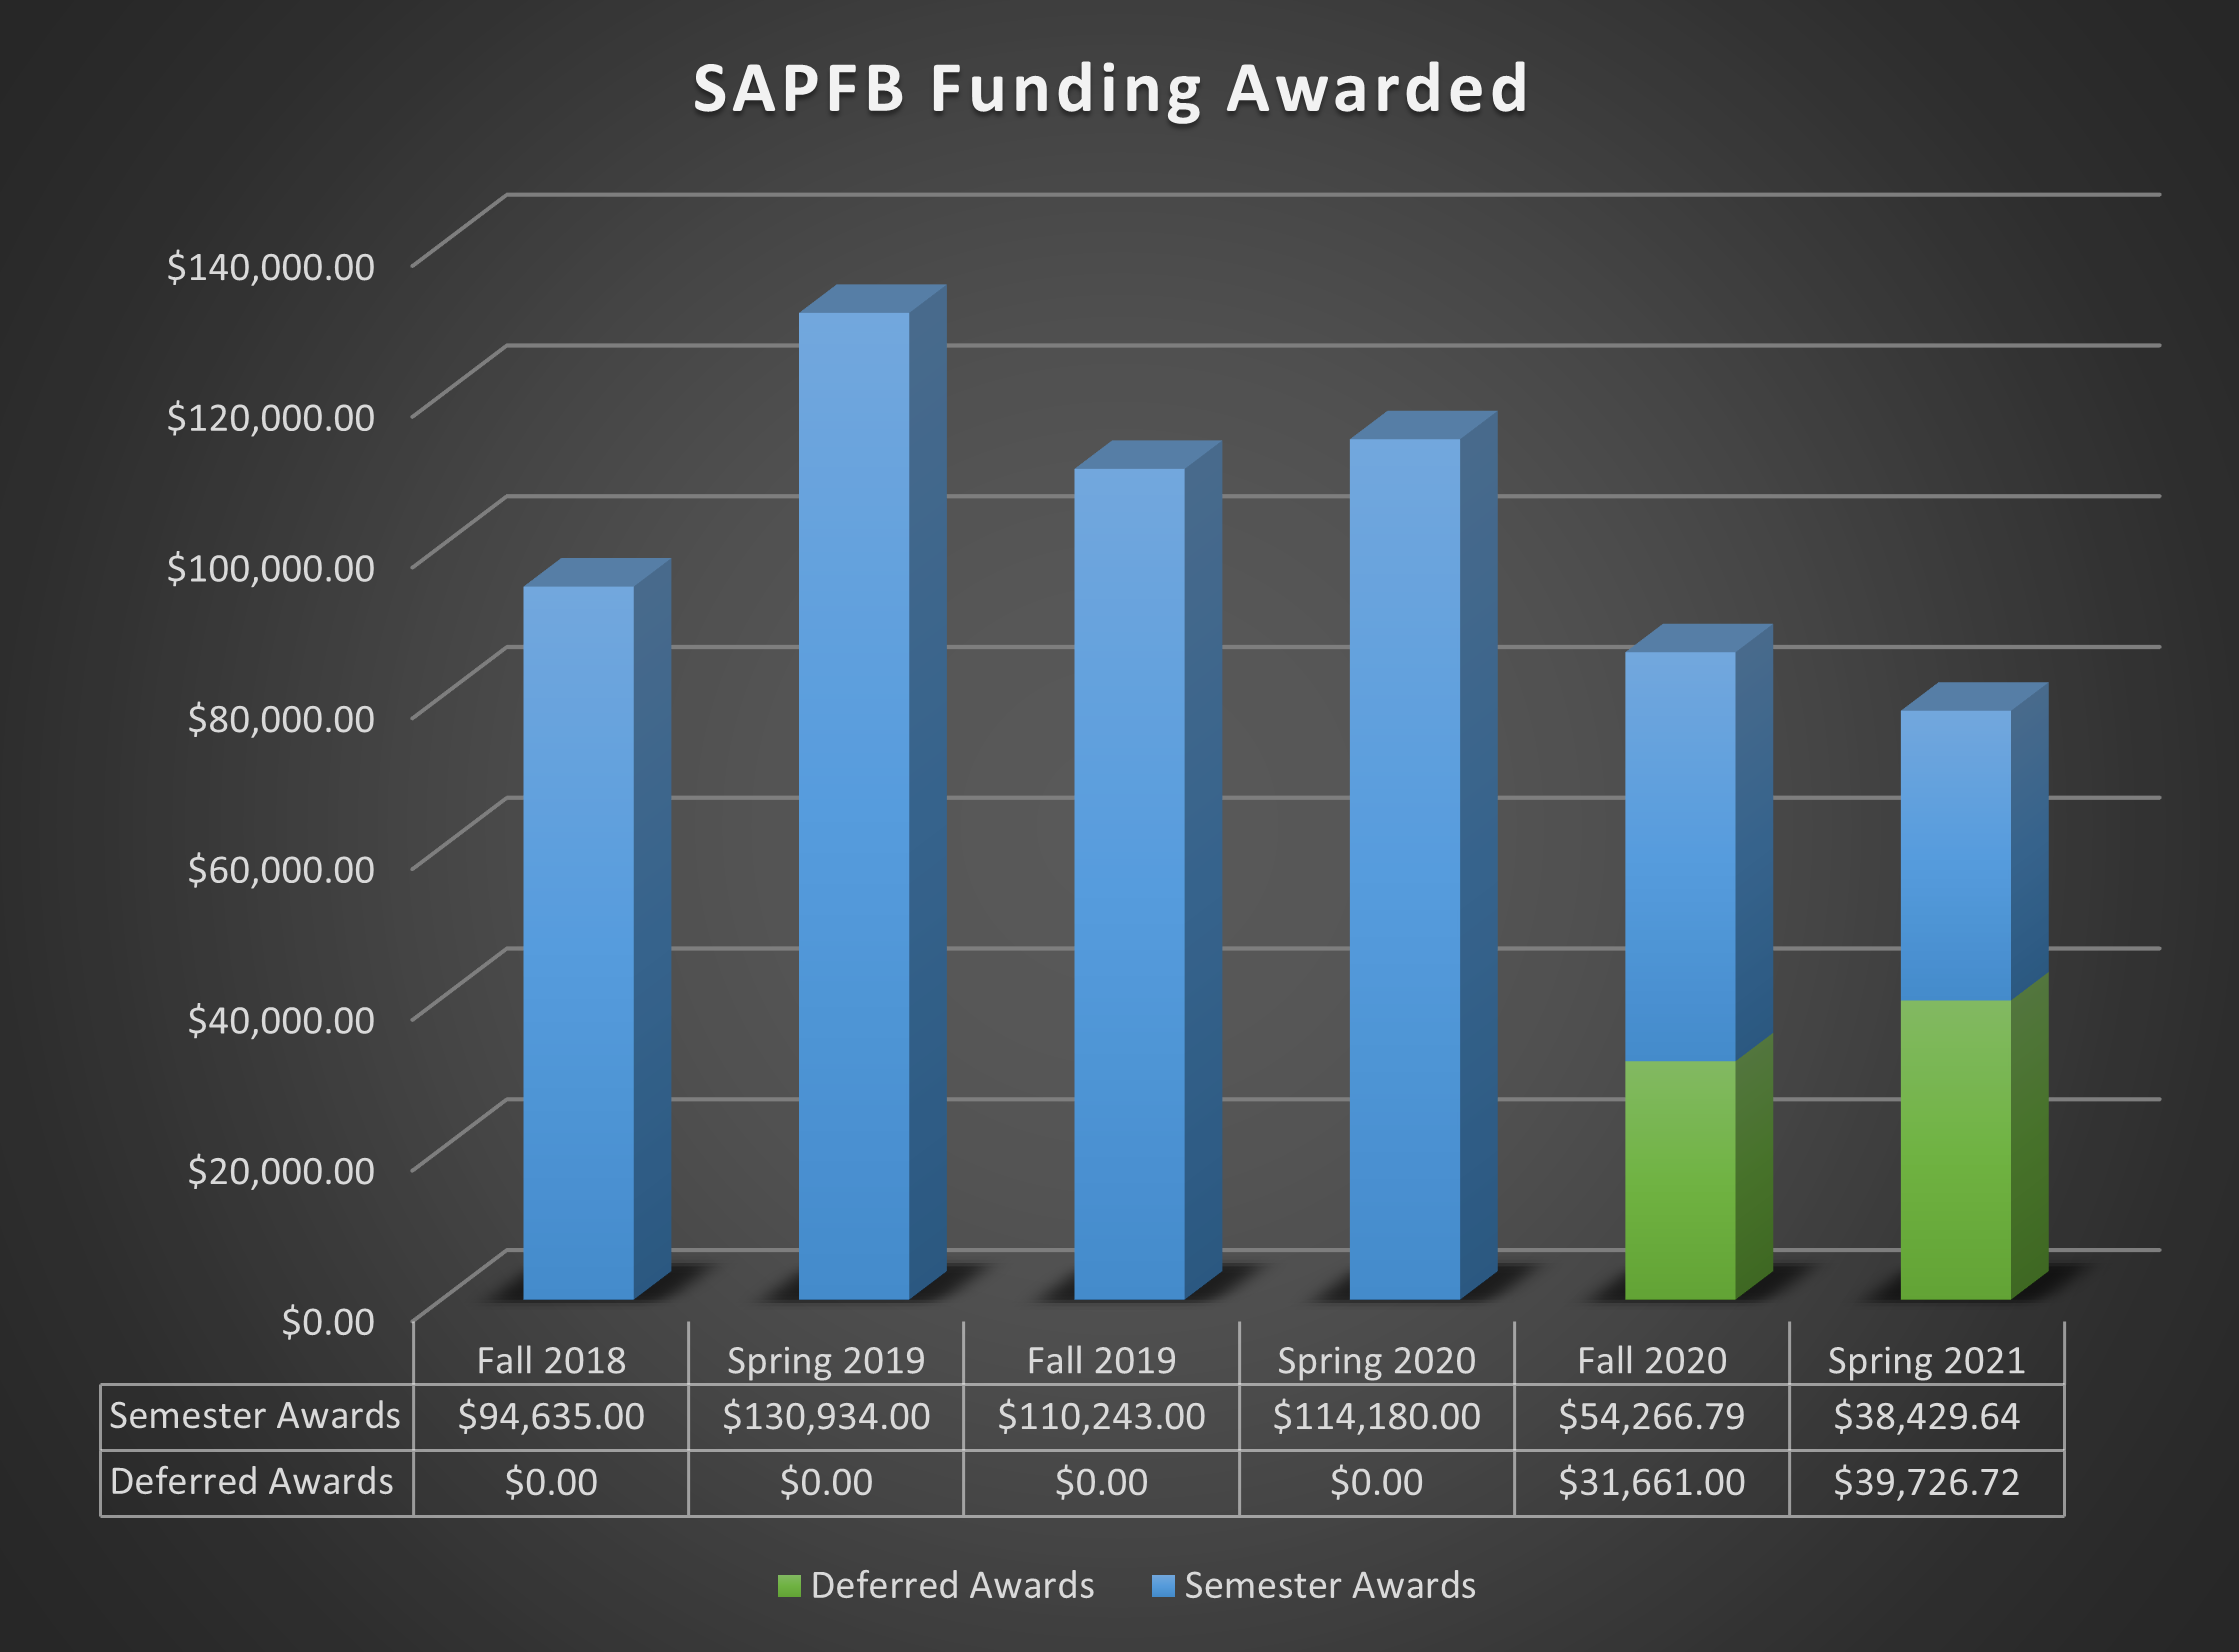 SAPFB total funding awarded over the previous 5 semesters.